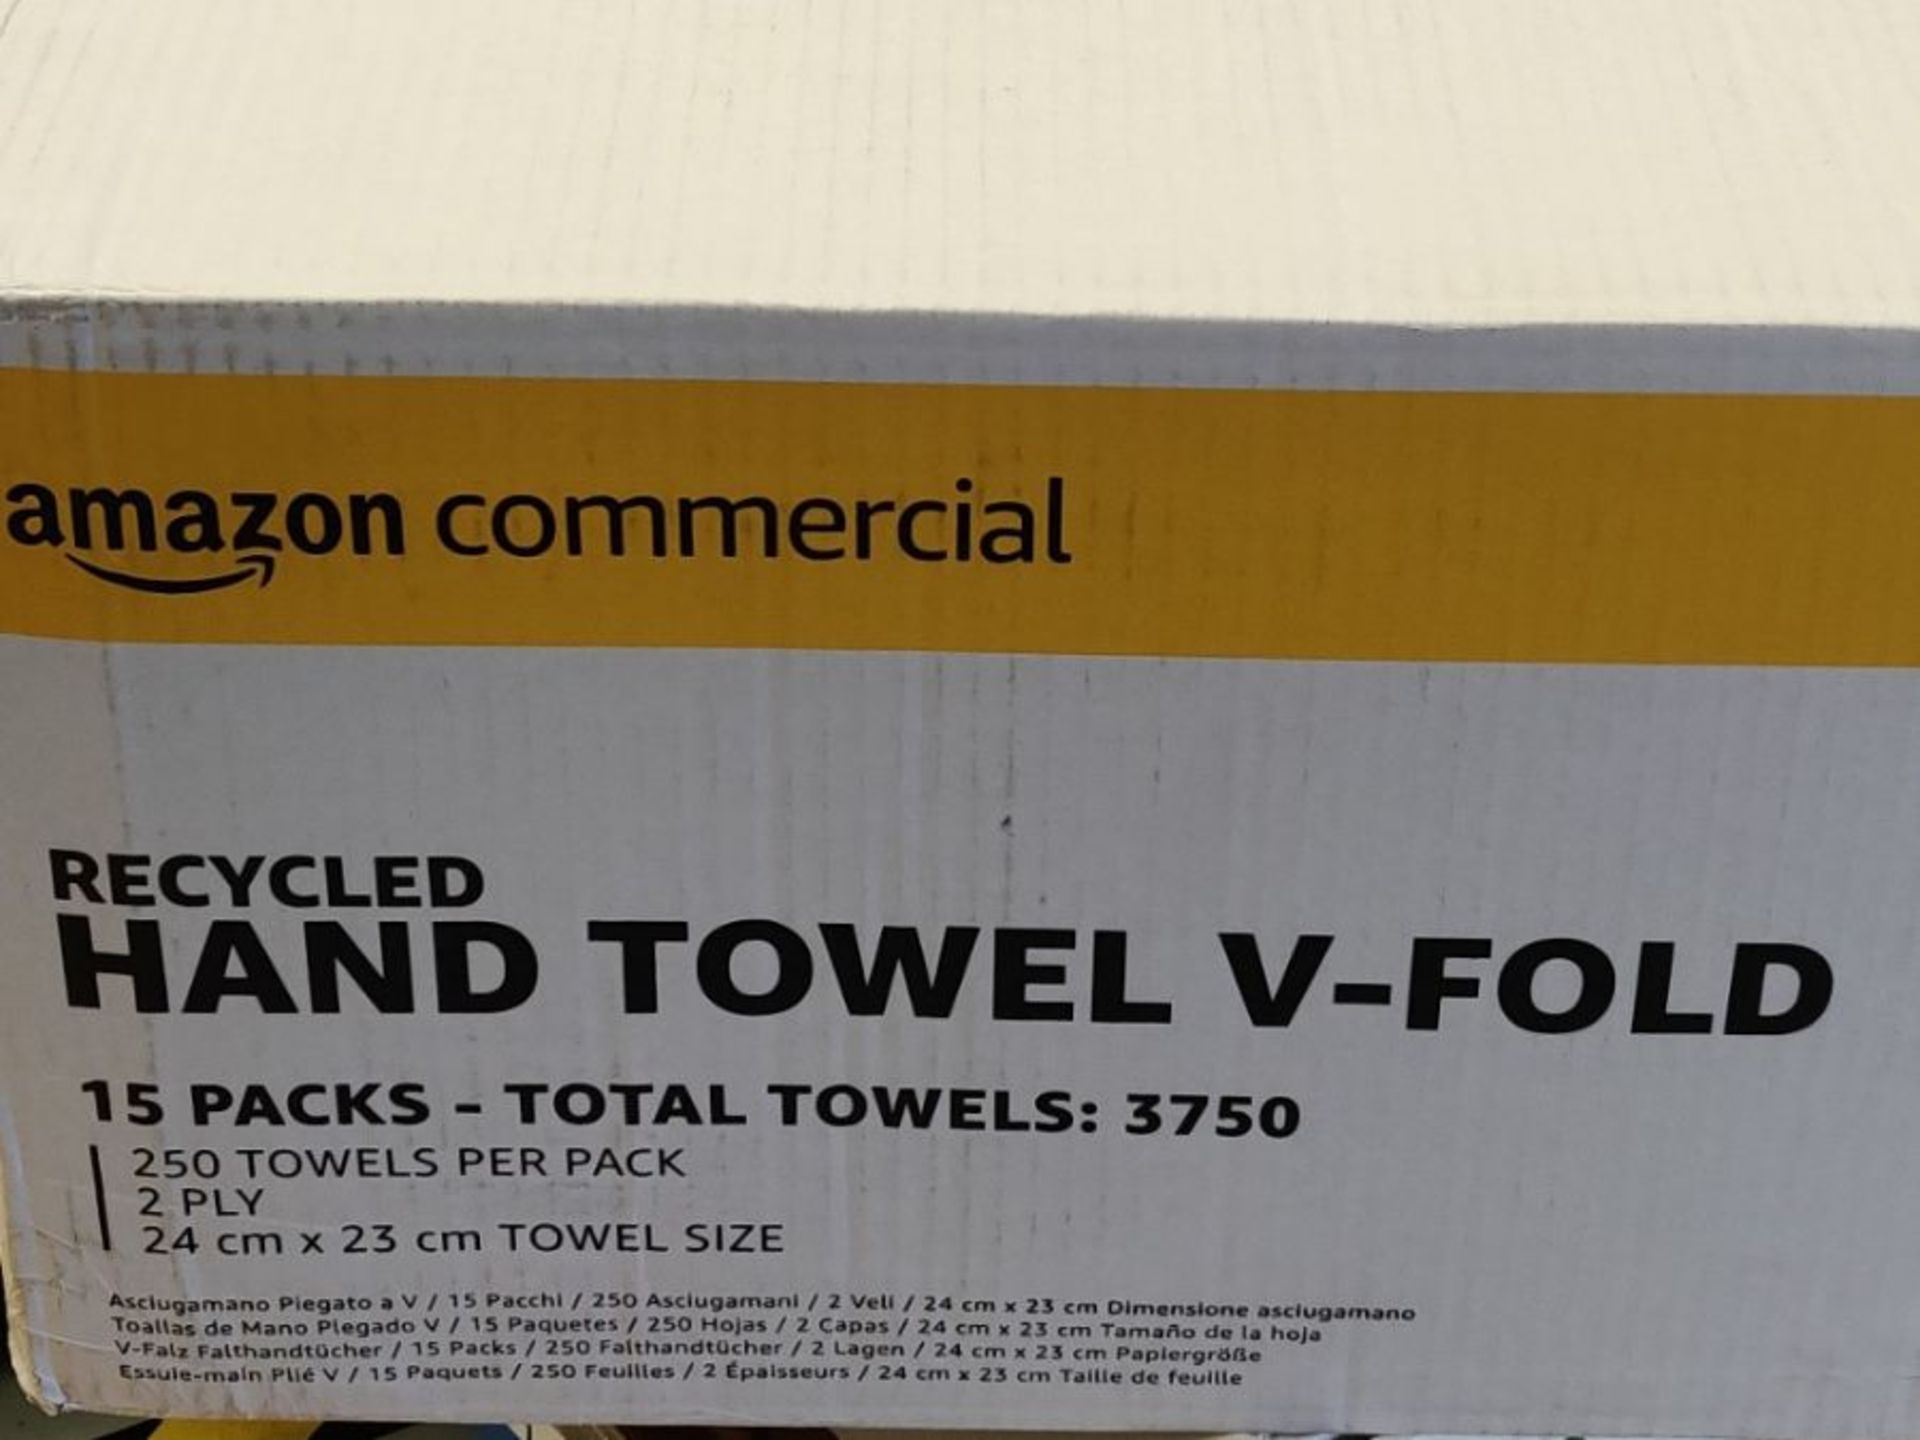 AmazonCommercial Interfold-Vfold Deinked Paper Hand Towels, 2 PLY - Pack of 15, 3750 s - Image 2 of 3